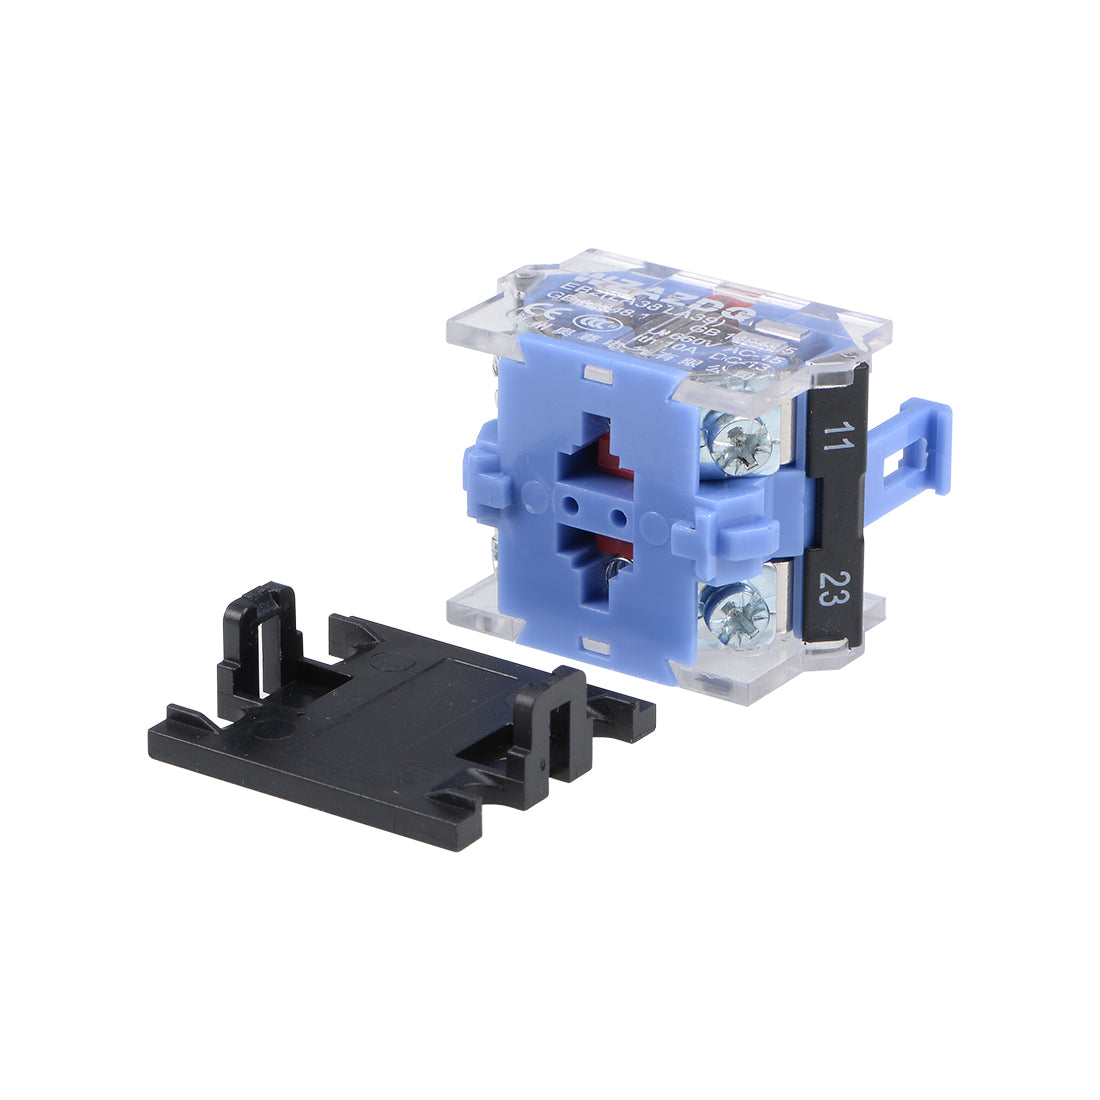 uxcell Uxcell Rotary Selector Switch 2 Positions 2NC Self-Lock Latching AC 660V 10A 22mm Panel Mount 2pcs